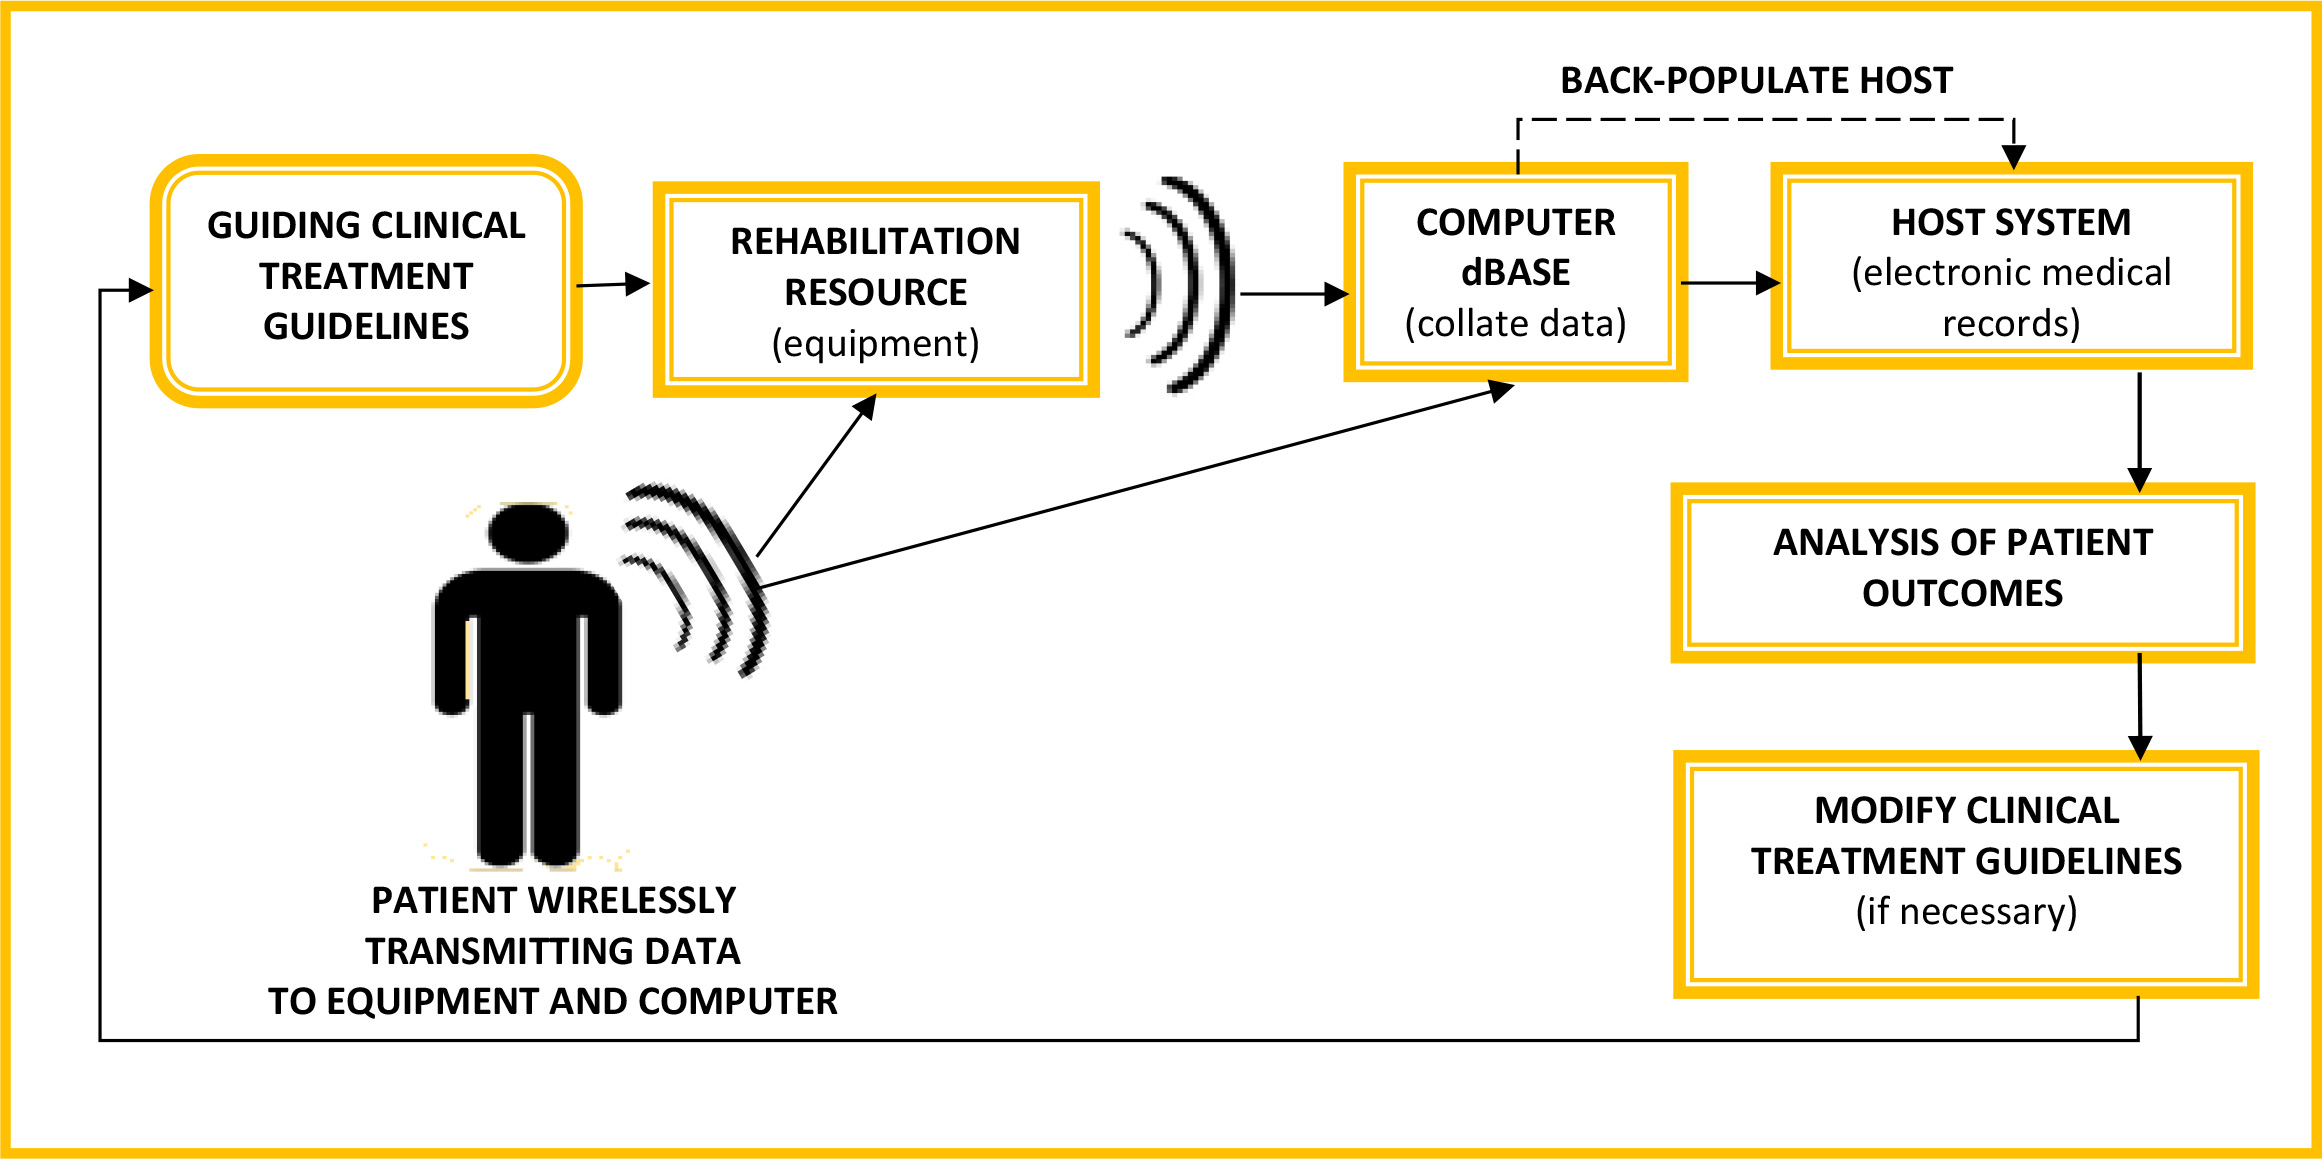 A flow chart showing the wireless transmission of data